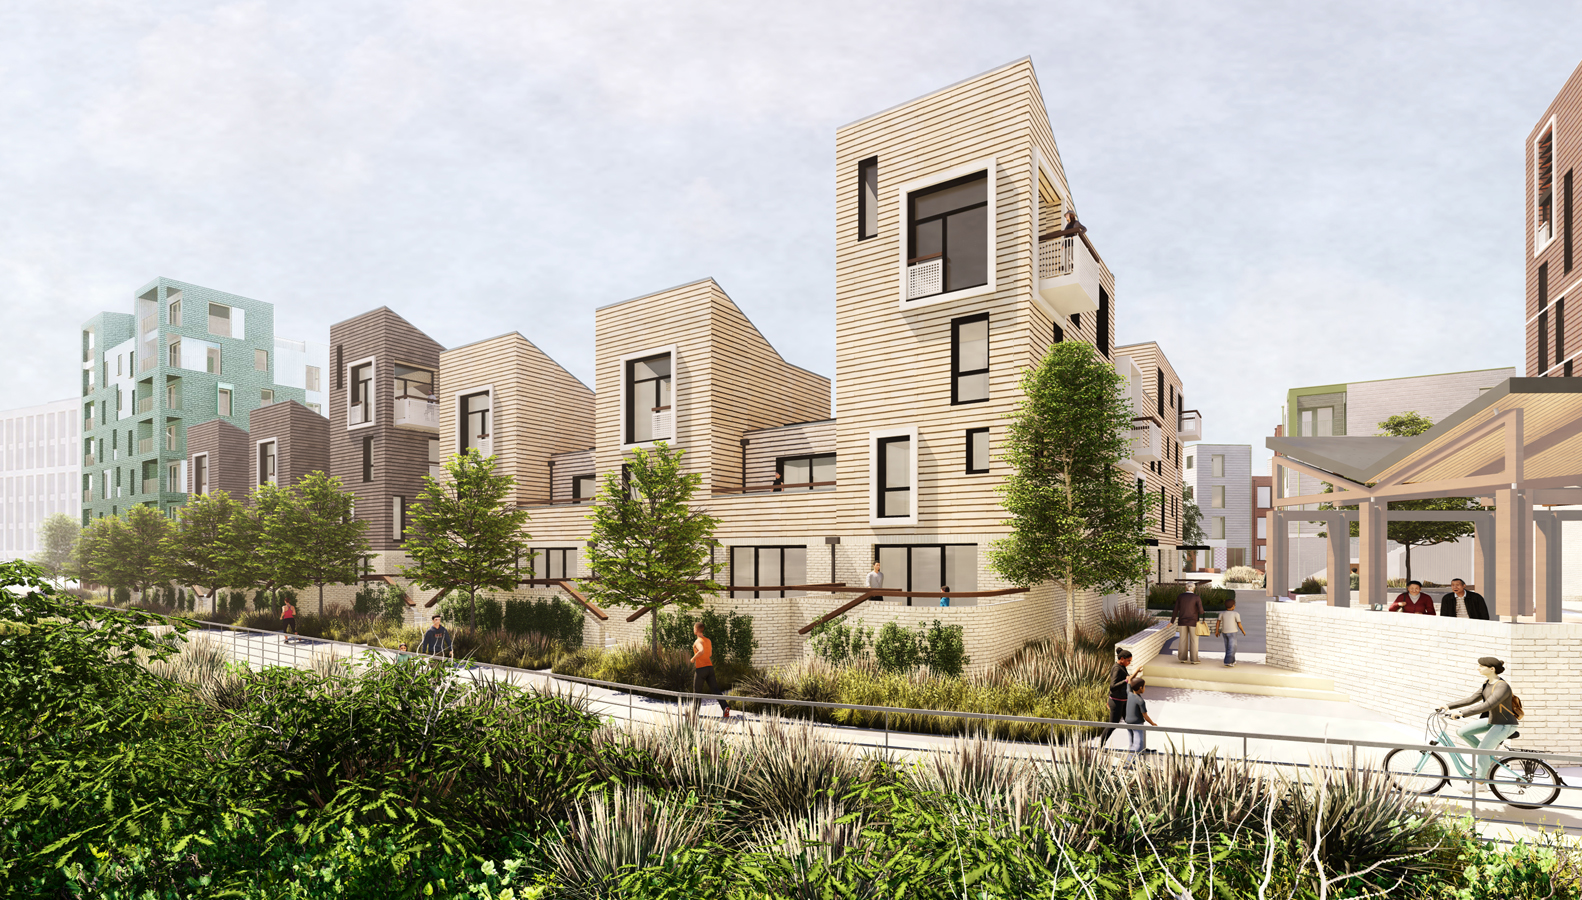 First new housing at the Vaux quarter located within the Riverside Sunderland Masterplan is submitted for planning